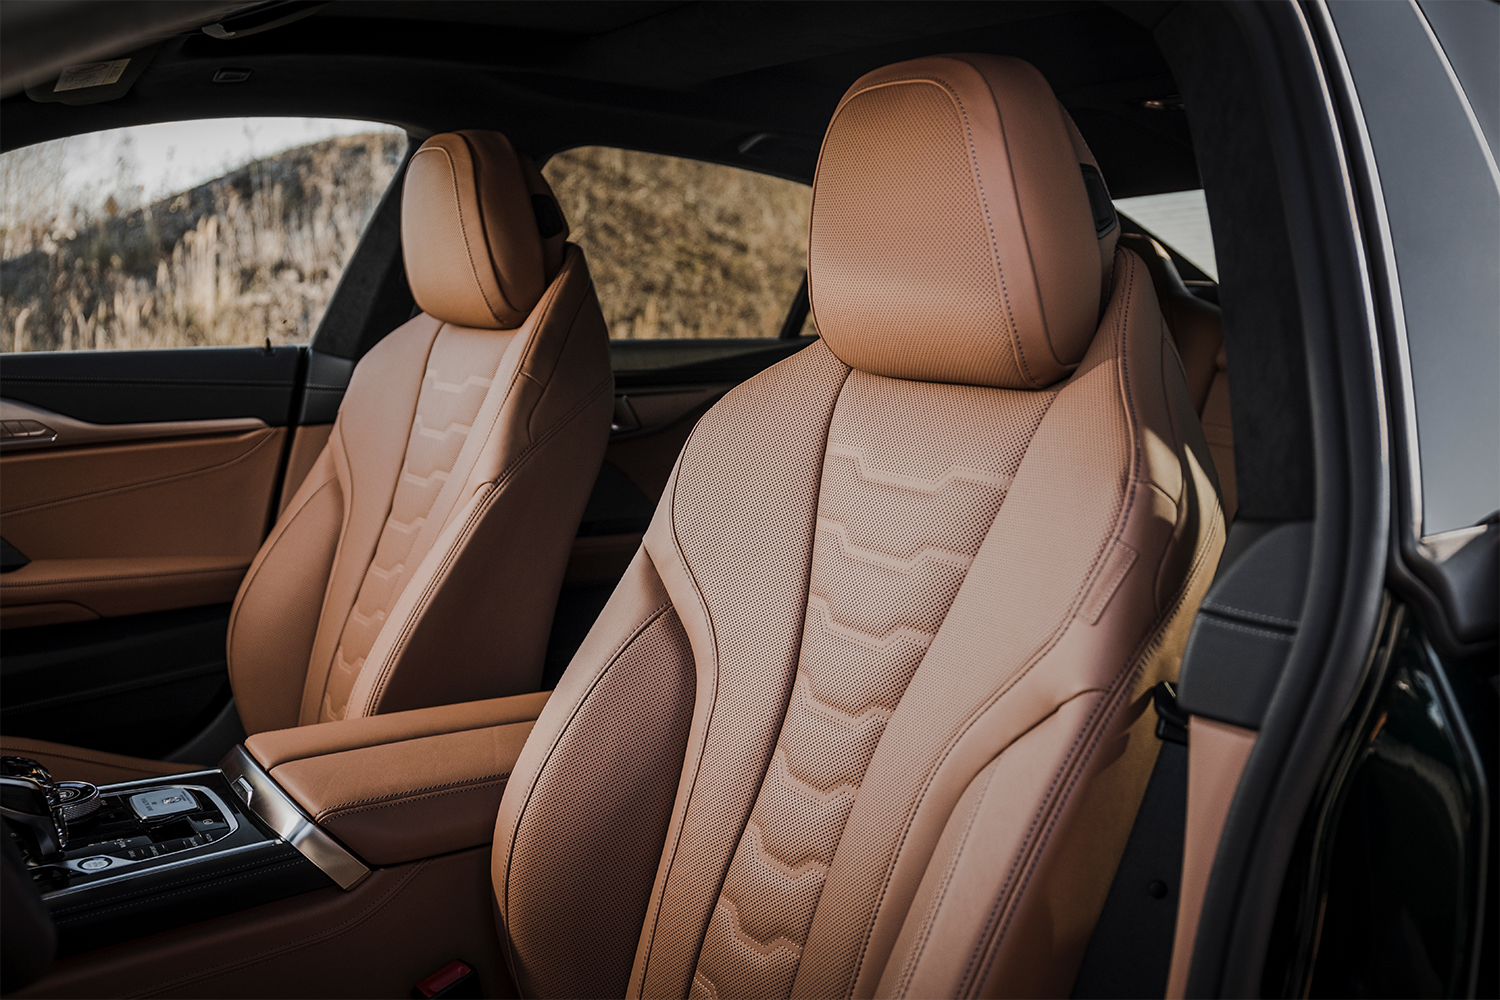 The leather front seats in the 2022 BMW Alpina B8 Gran Coupe